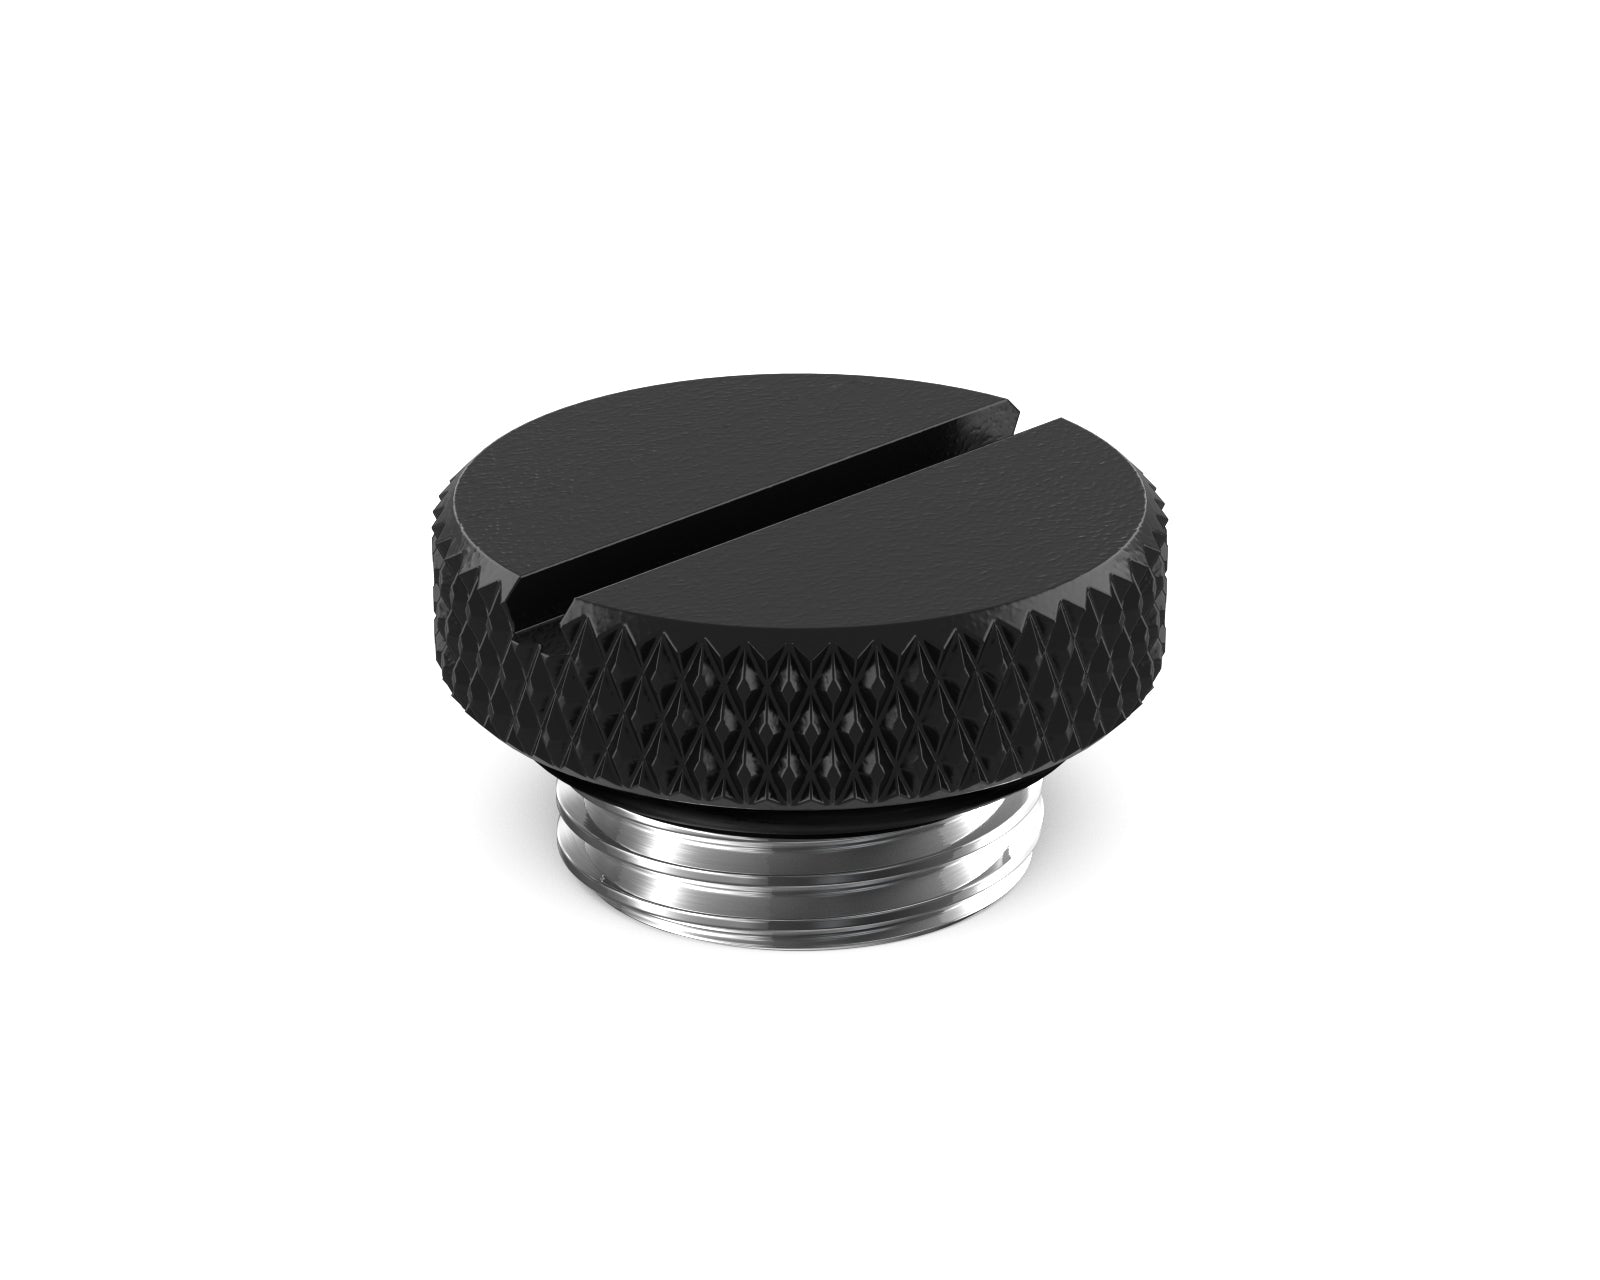 PrimoChill G 1/4in. SX Knurled Slotted Stop Fitting - PrimoChill - KEEPING IT COOL Satin Black